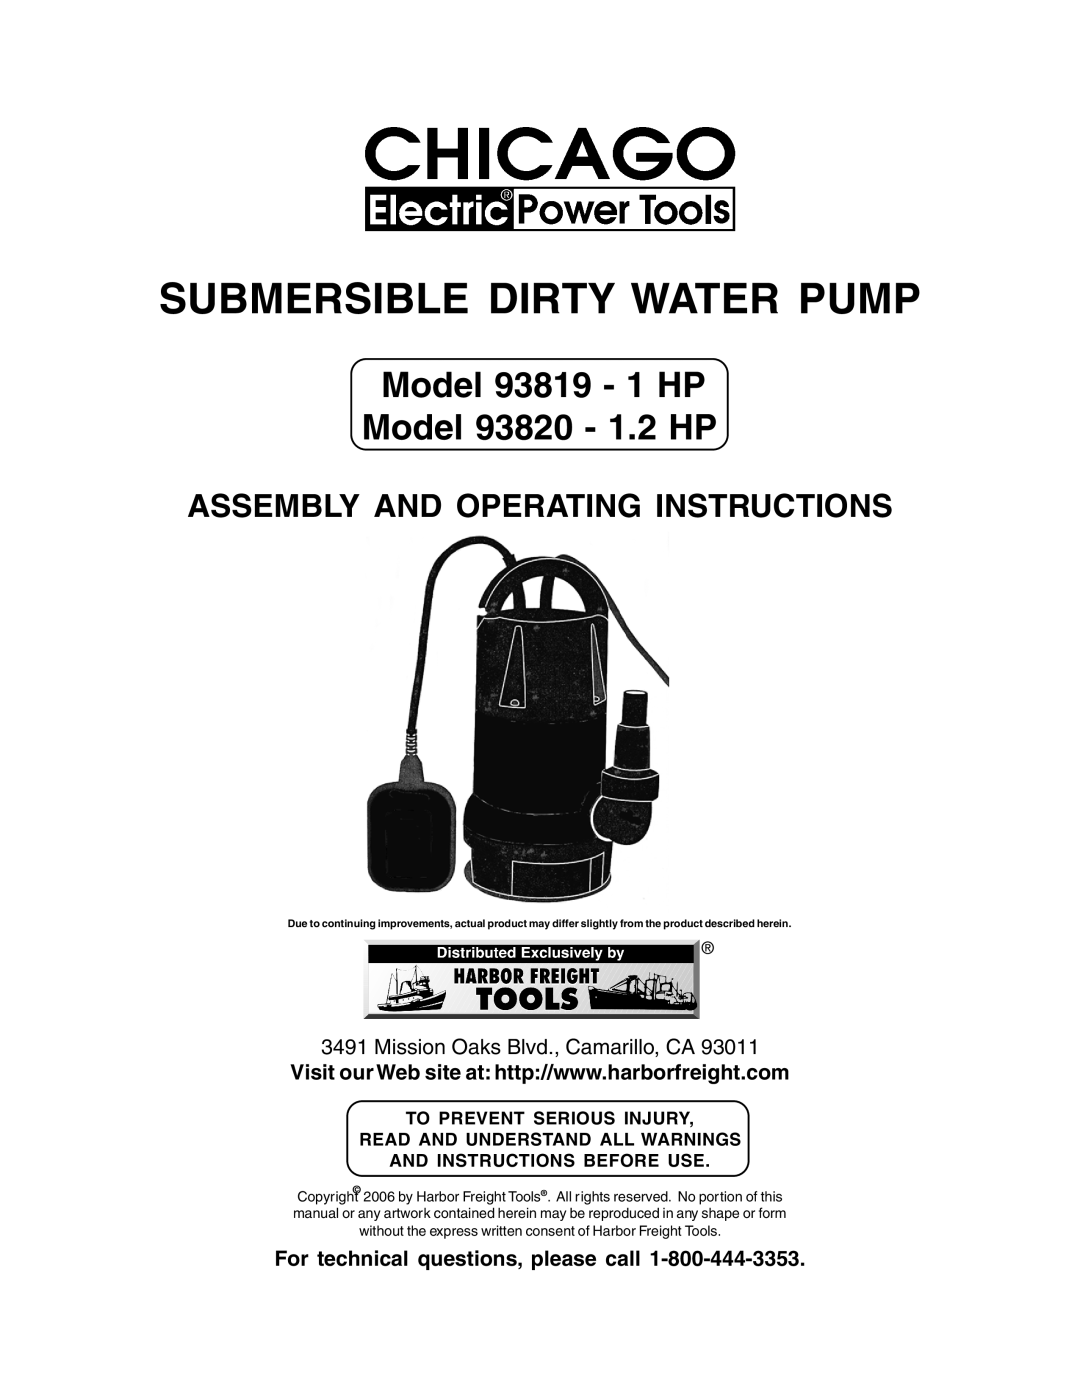 Harbor Freight Tools Model 93819 manual For technical questions, please call, Submersible Dirty Water Pump 